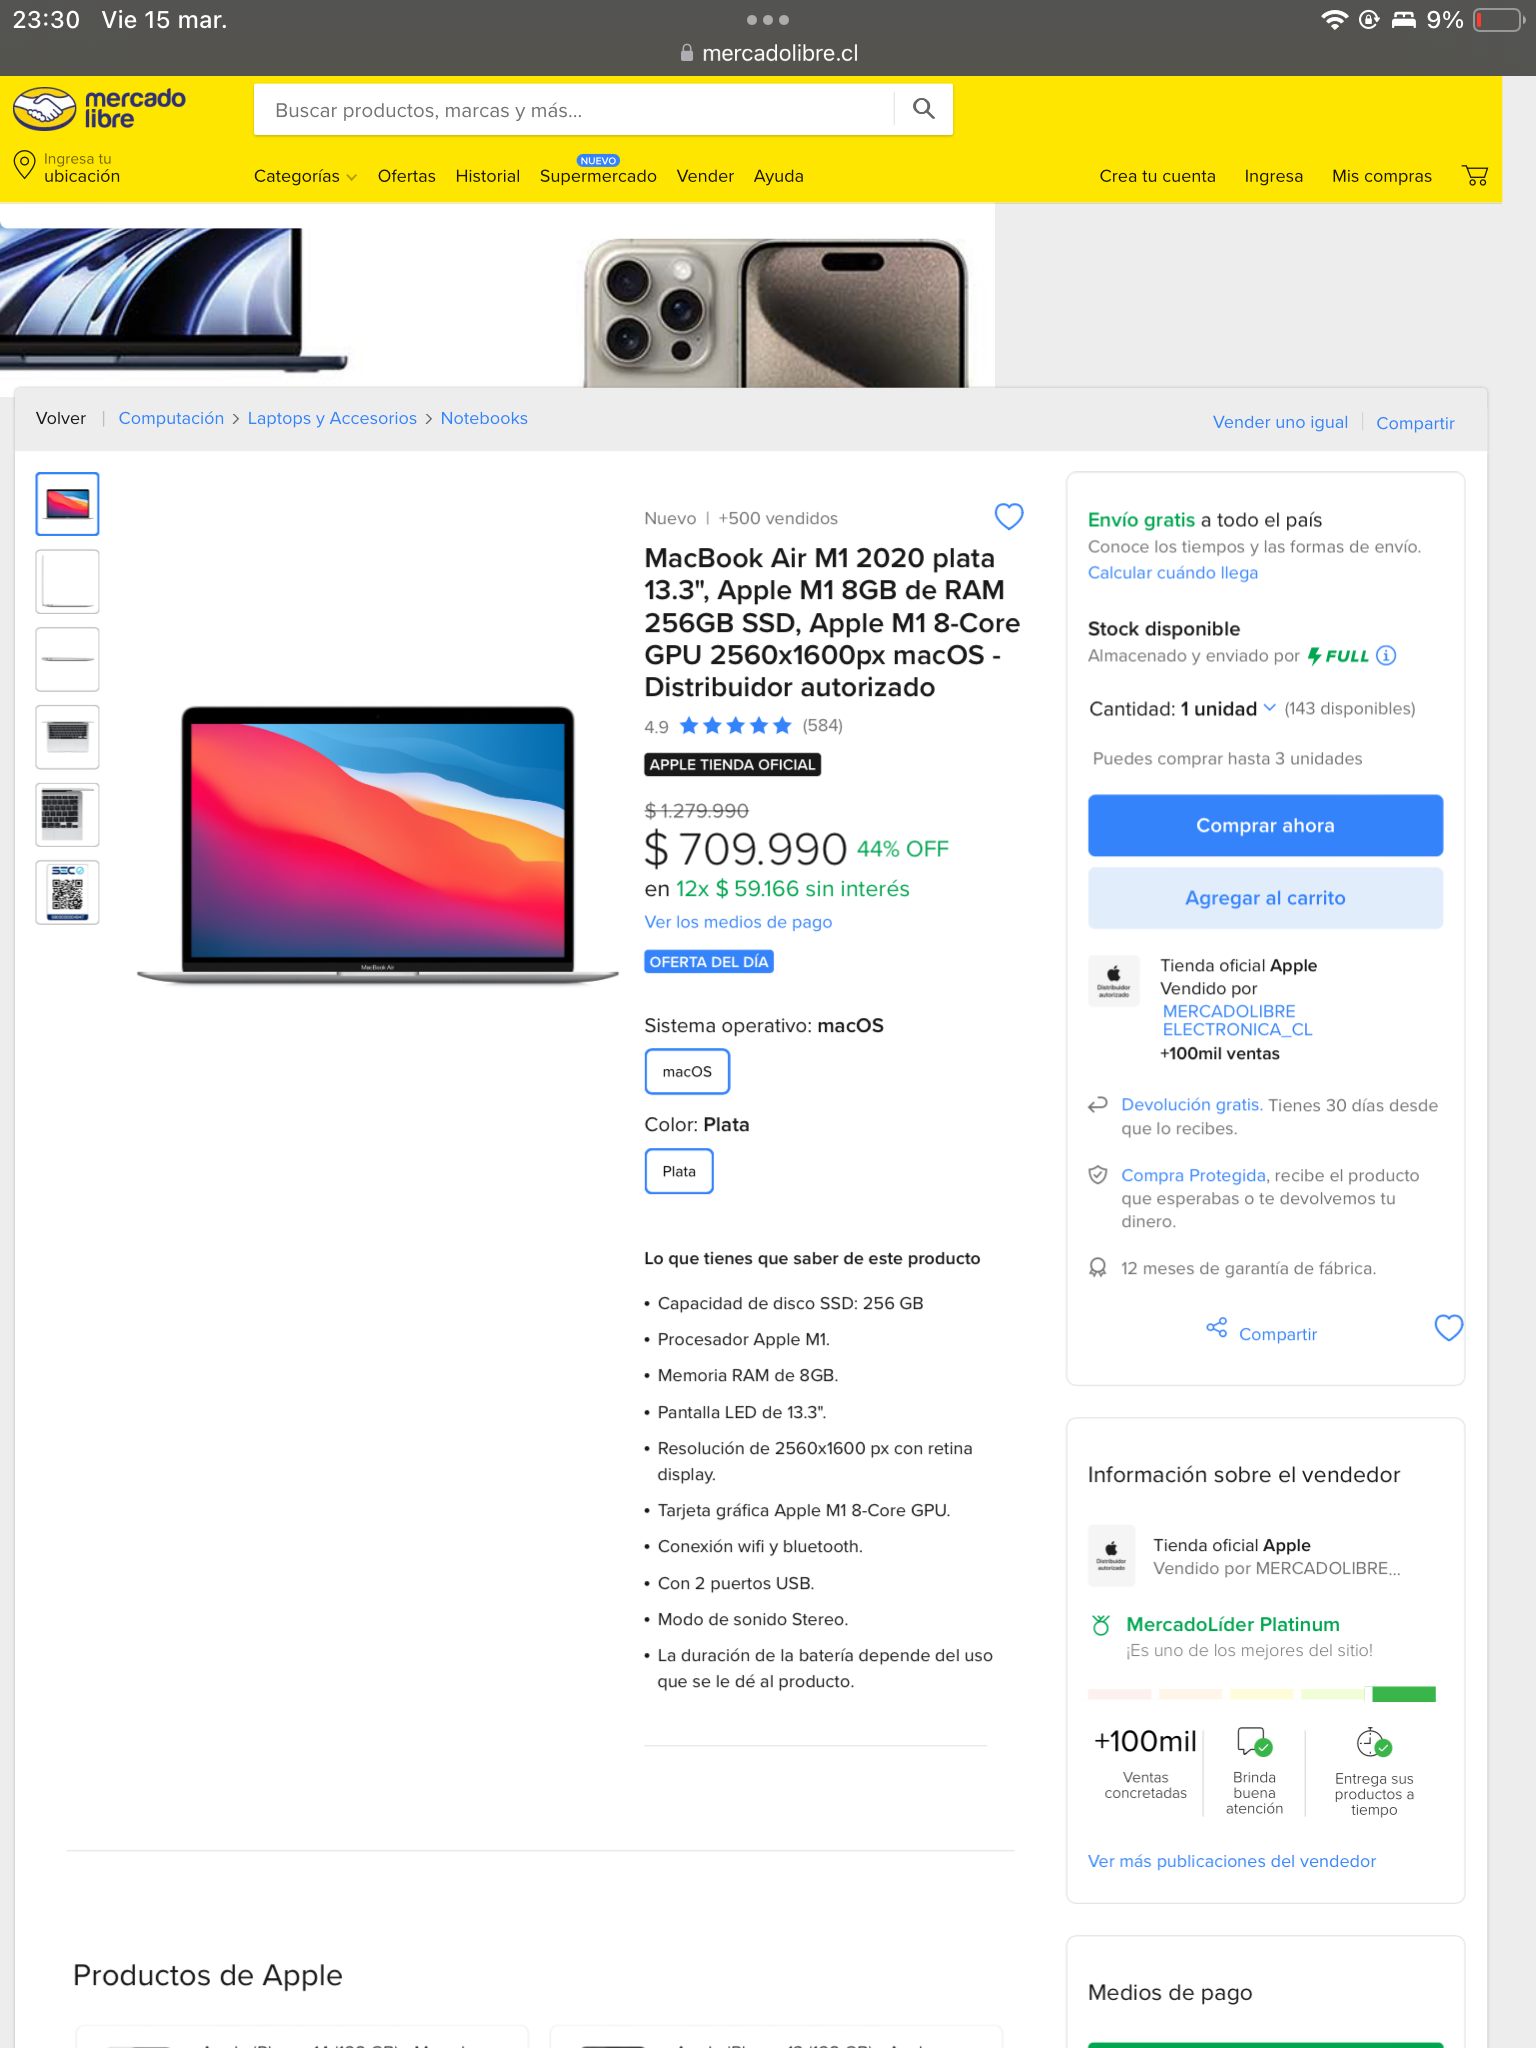 M1 MacBook Air for sale in MercadoLibre Chile (price in CLP)